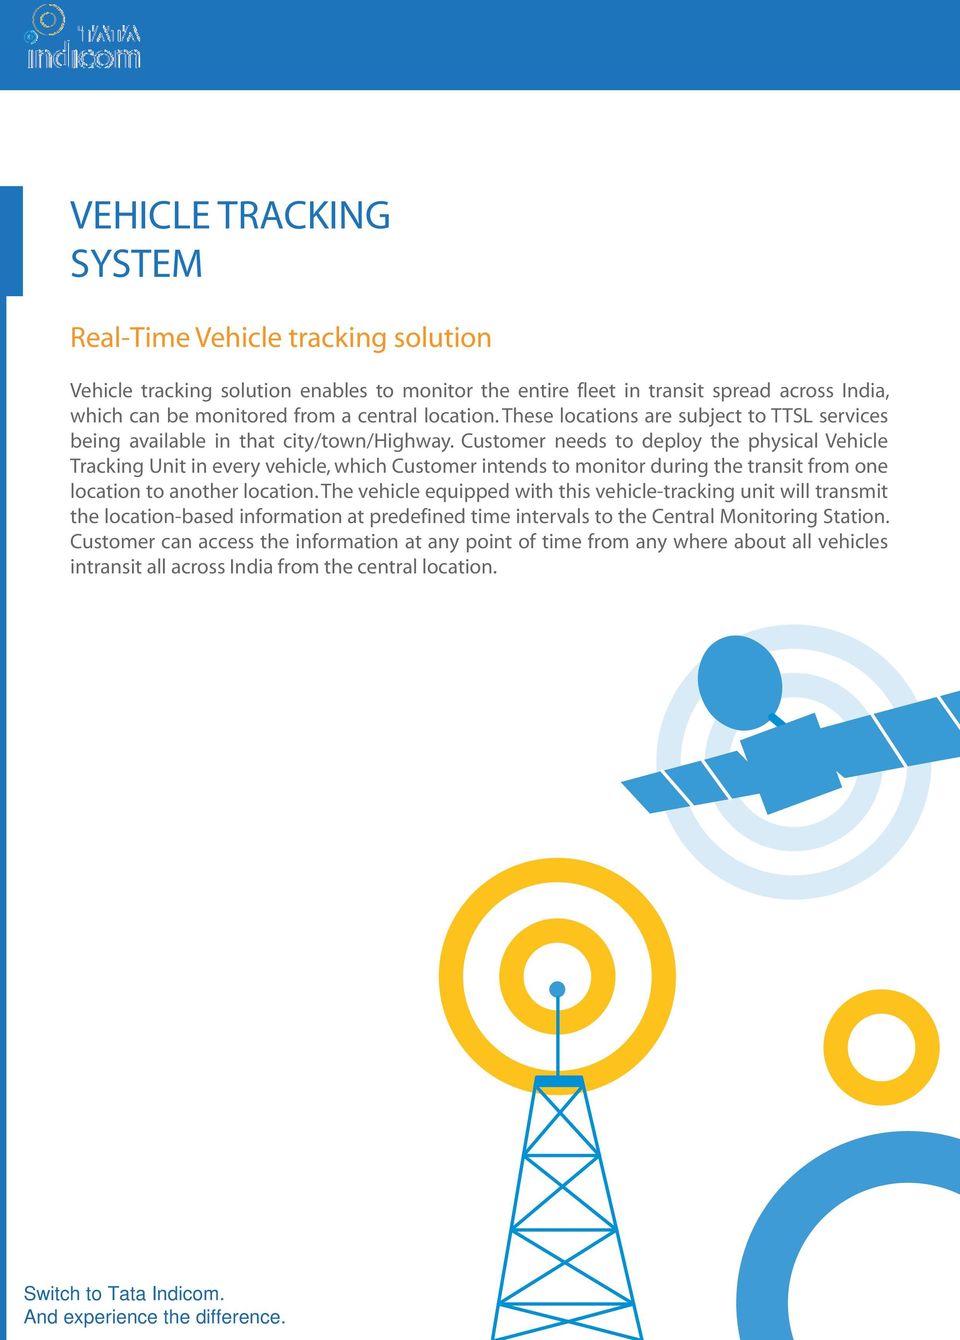 Customer needs to deploy the physical Vehicle Tracking Unit in every vehicle, which Customer intends to monitor during the transit from one location to another location.